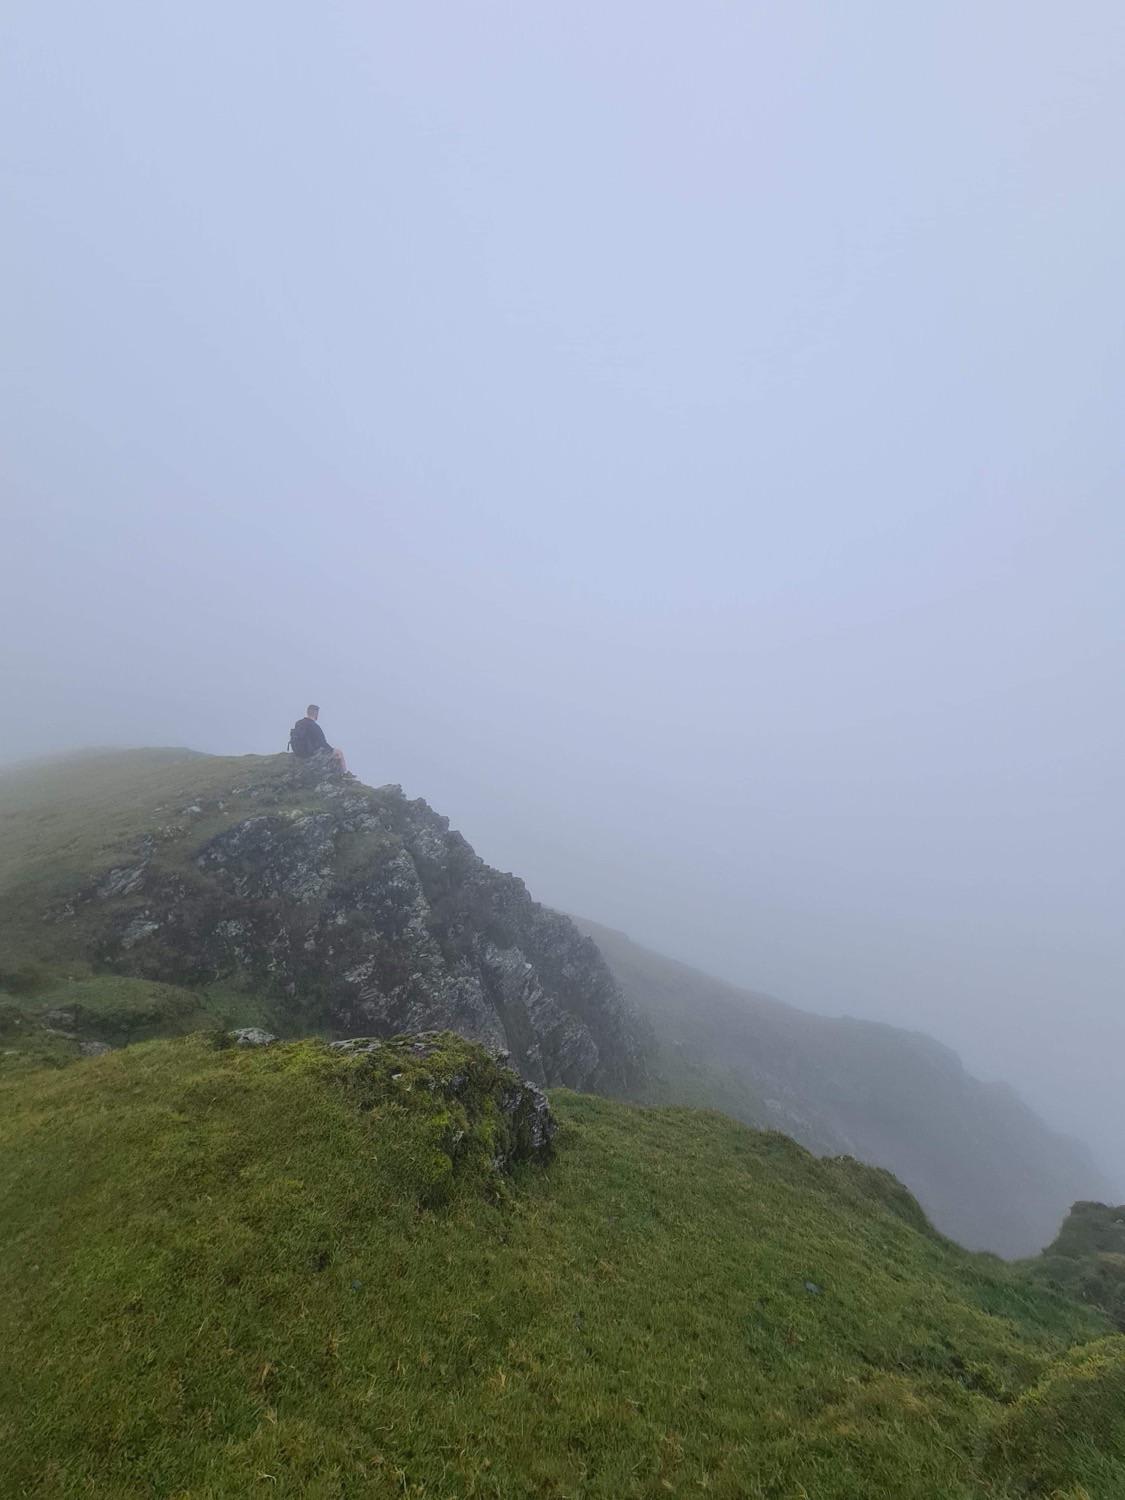 Went hiking up Blencathra in the English Lake District. The height is 868 metres, not the tallest but was told you can get some stunning views but as you can see I was met with nothing but spooky mist… loved the eerie feeling though.